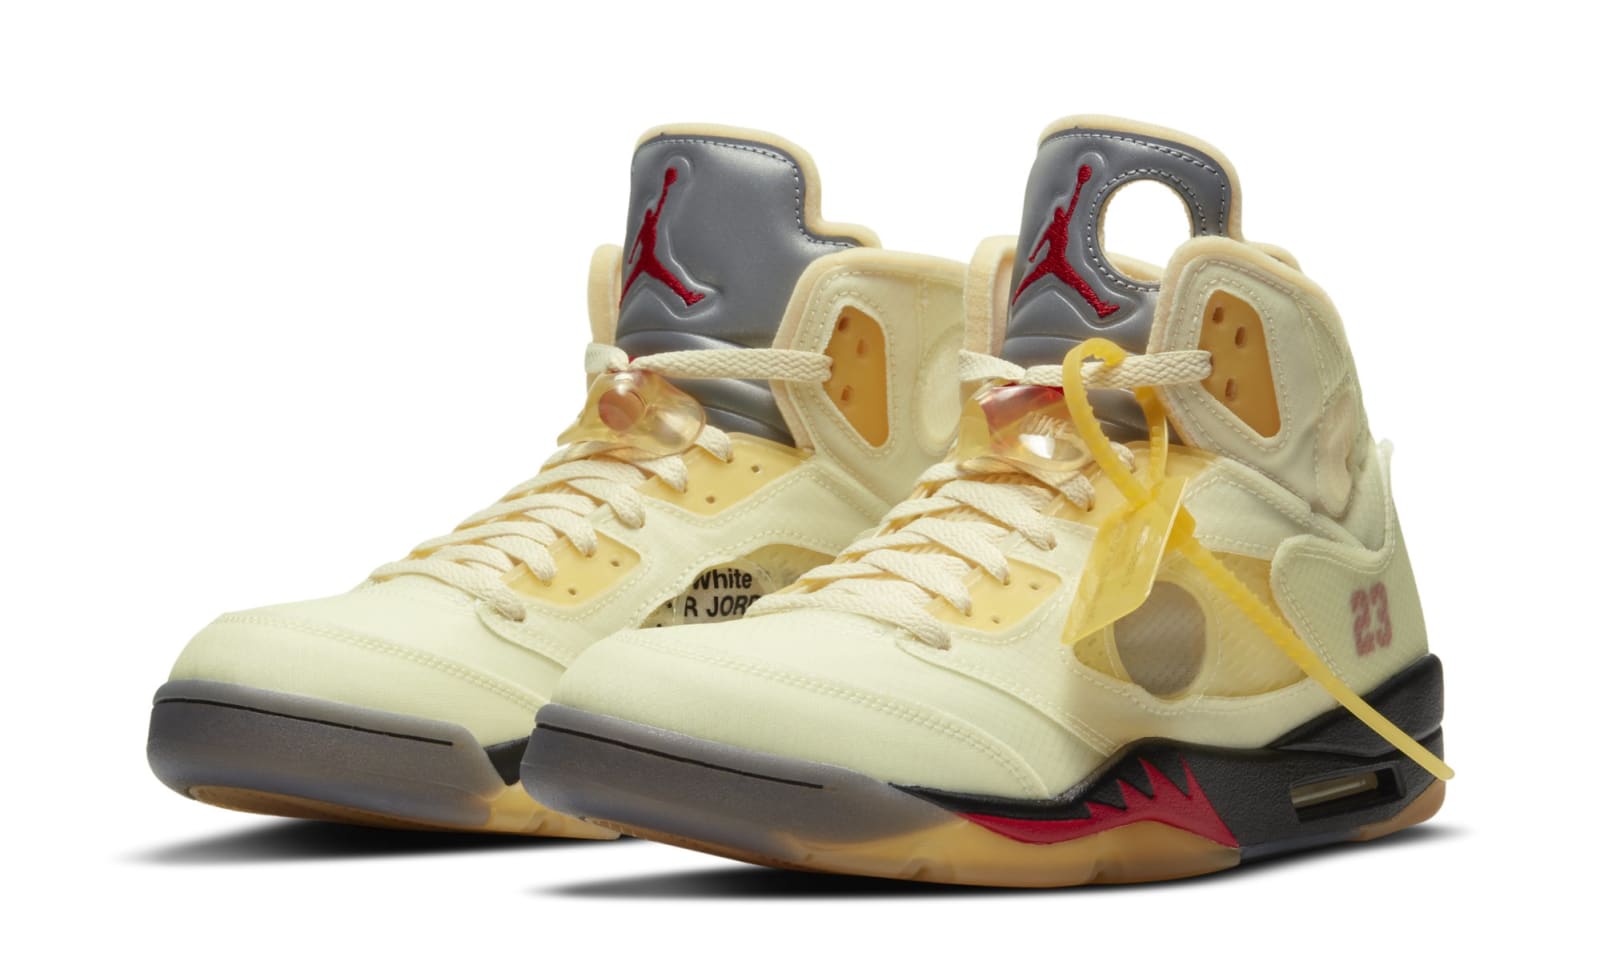 Off-White x Air Jordan 5 "Sail" Delivers Large Returns To Resellers